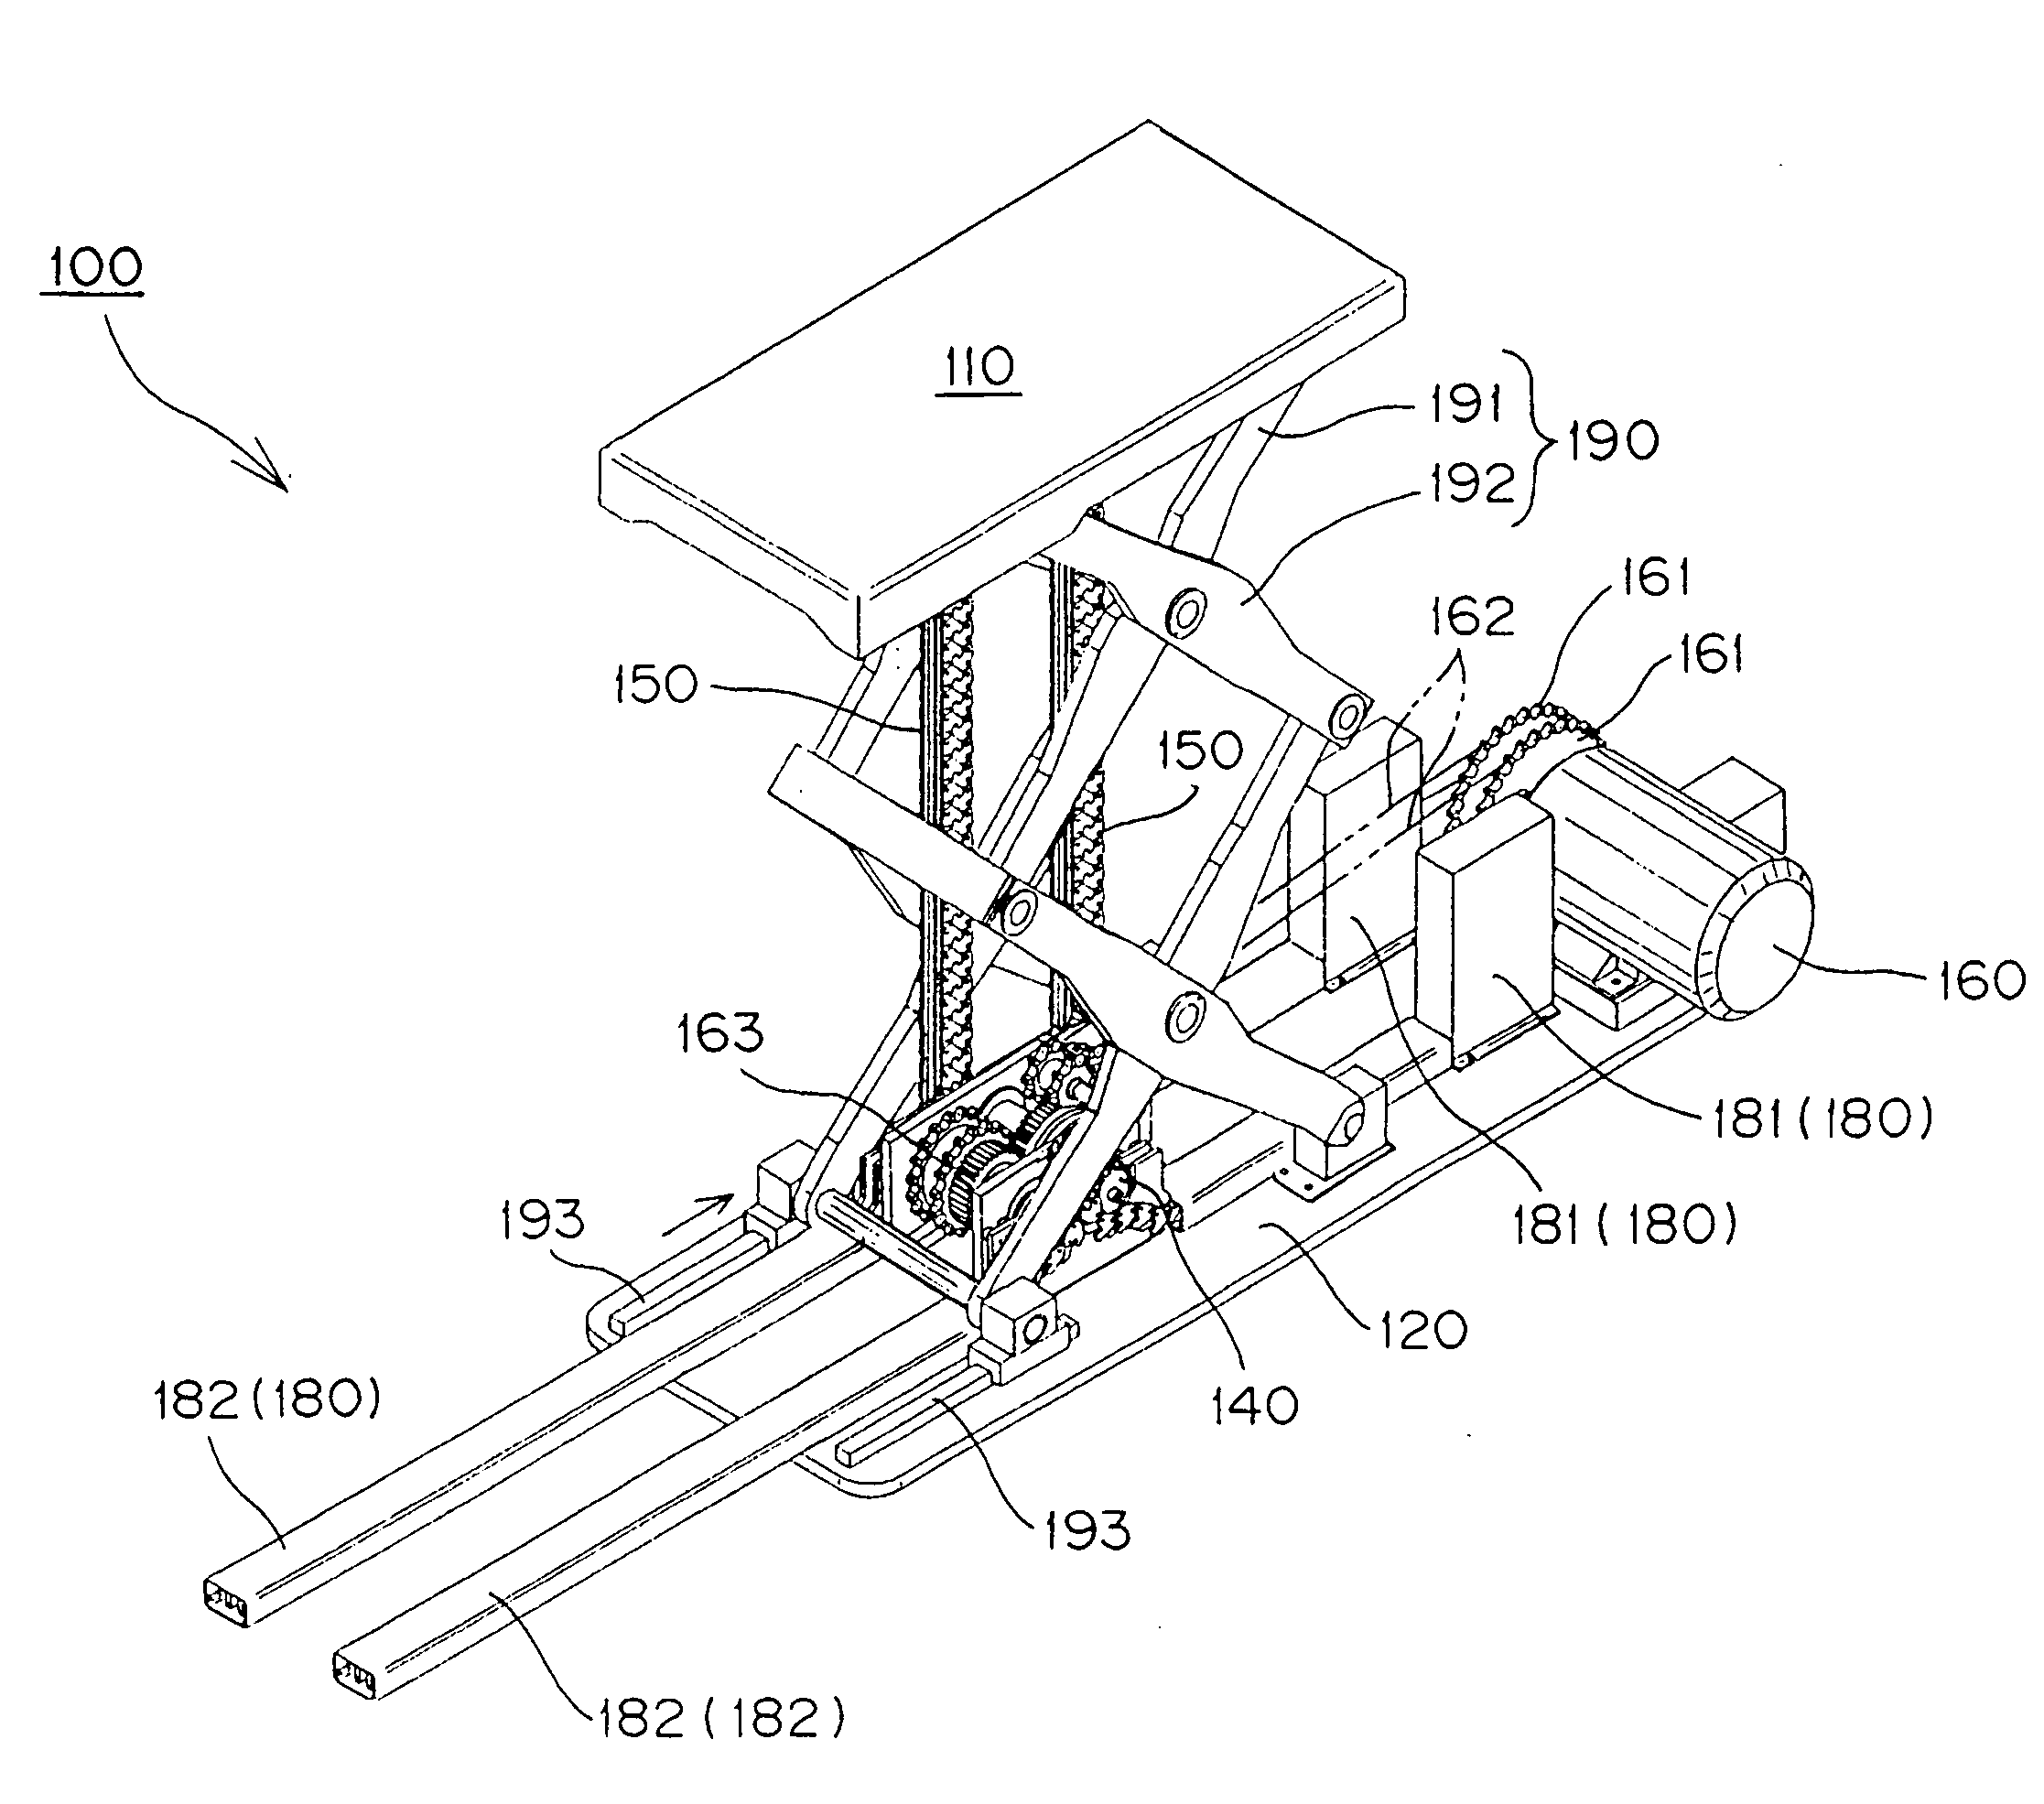 Engagement chain type hoisting and lowering device